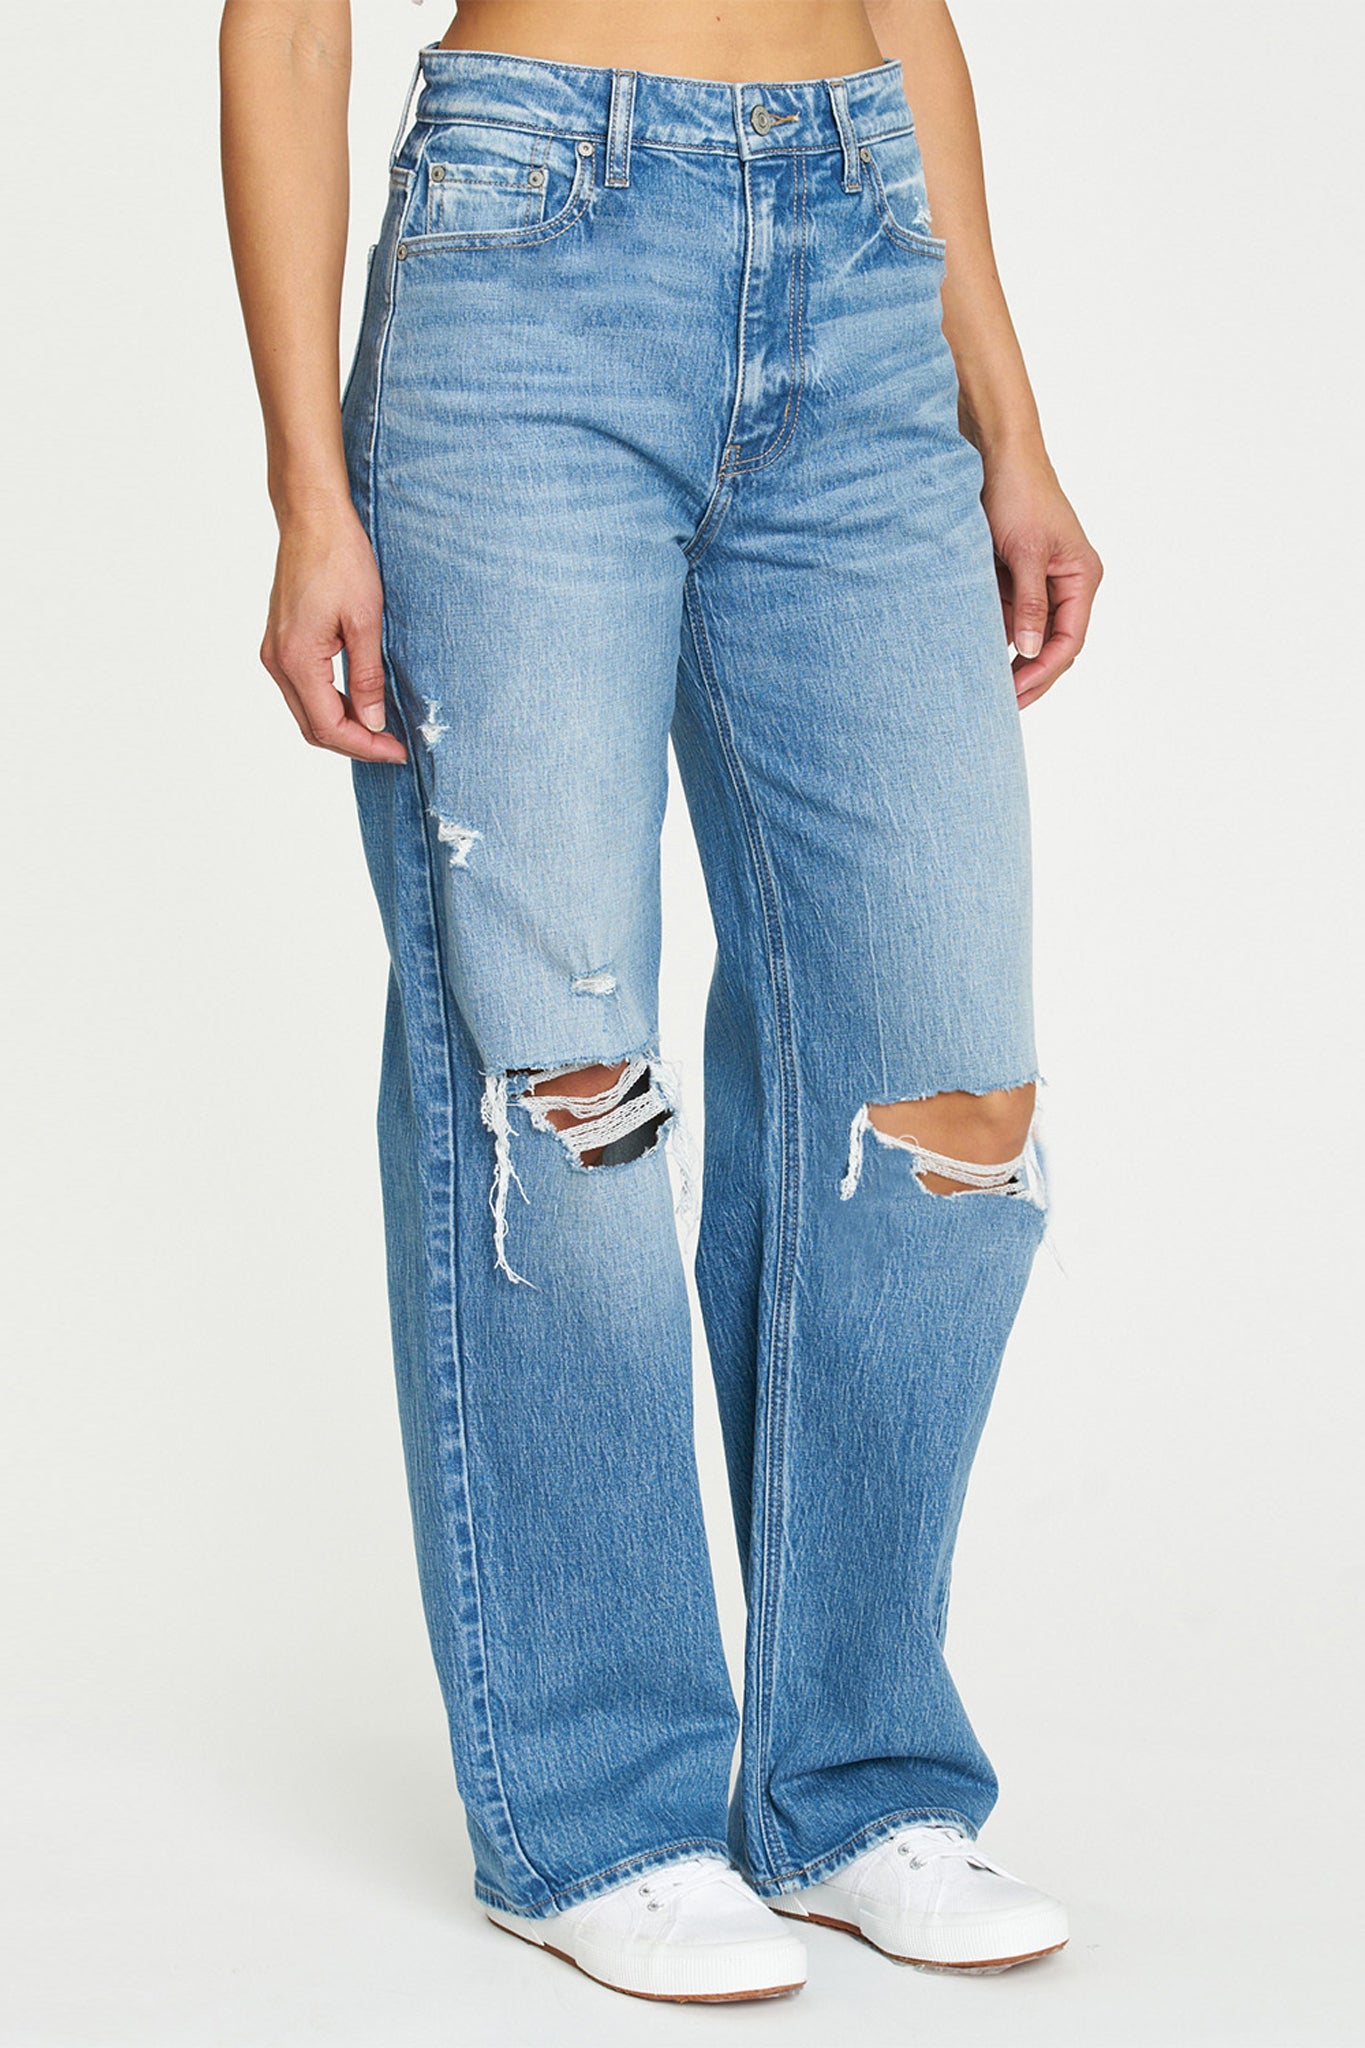 Eunina Ryder Baggy Jeans in Smoke Tree